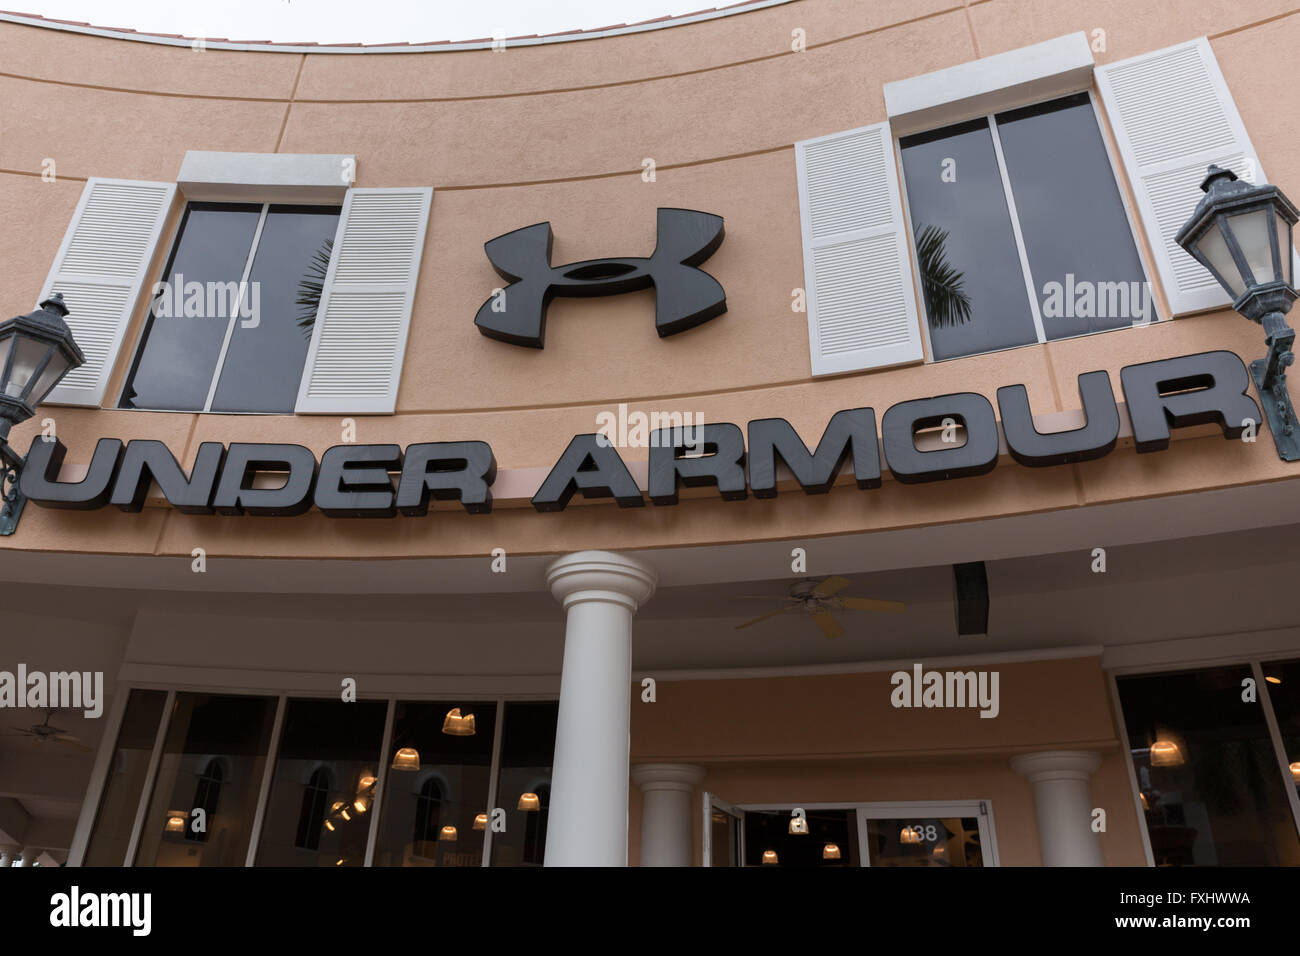 Under Armour Factory Outlet Locations Hotsell, 59% OFF | centro-innato.com